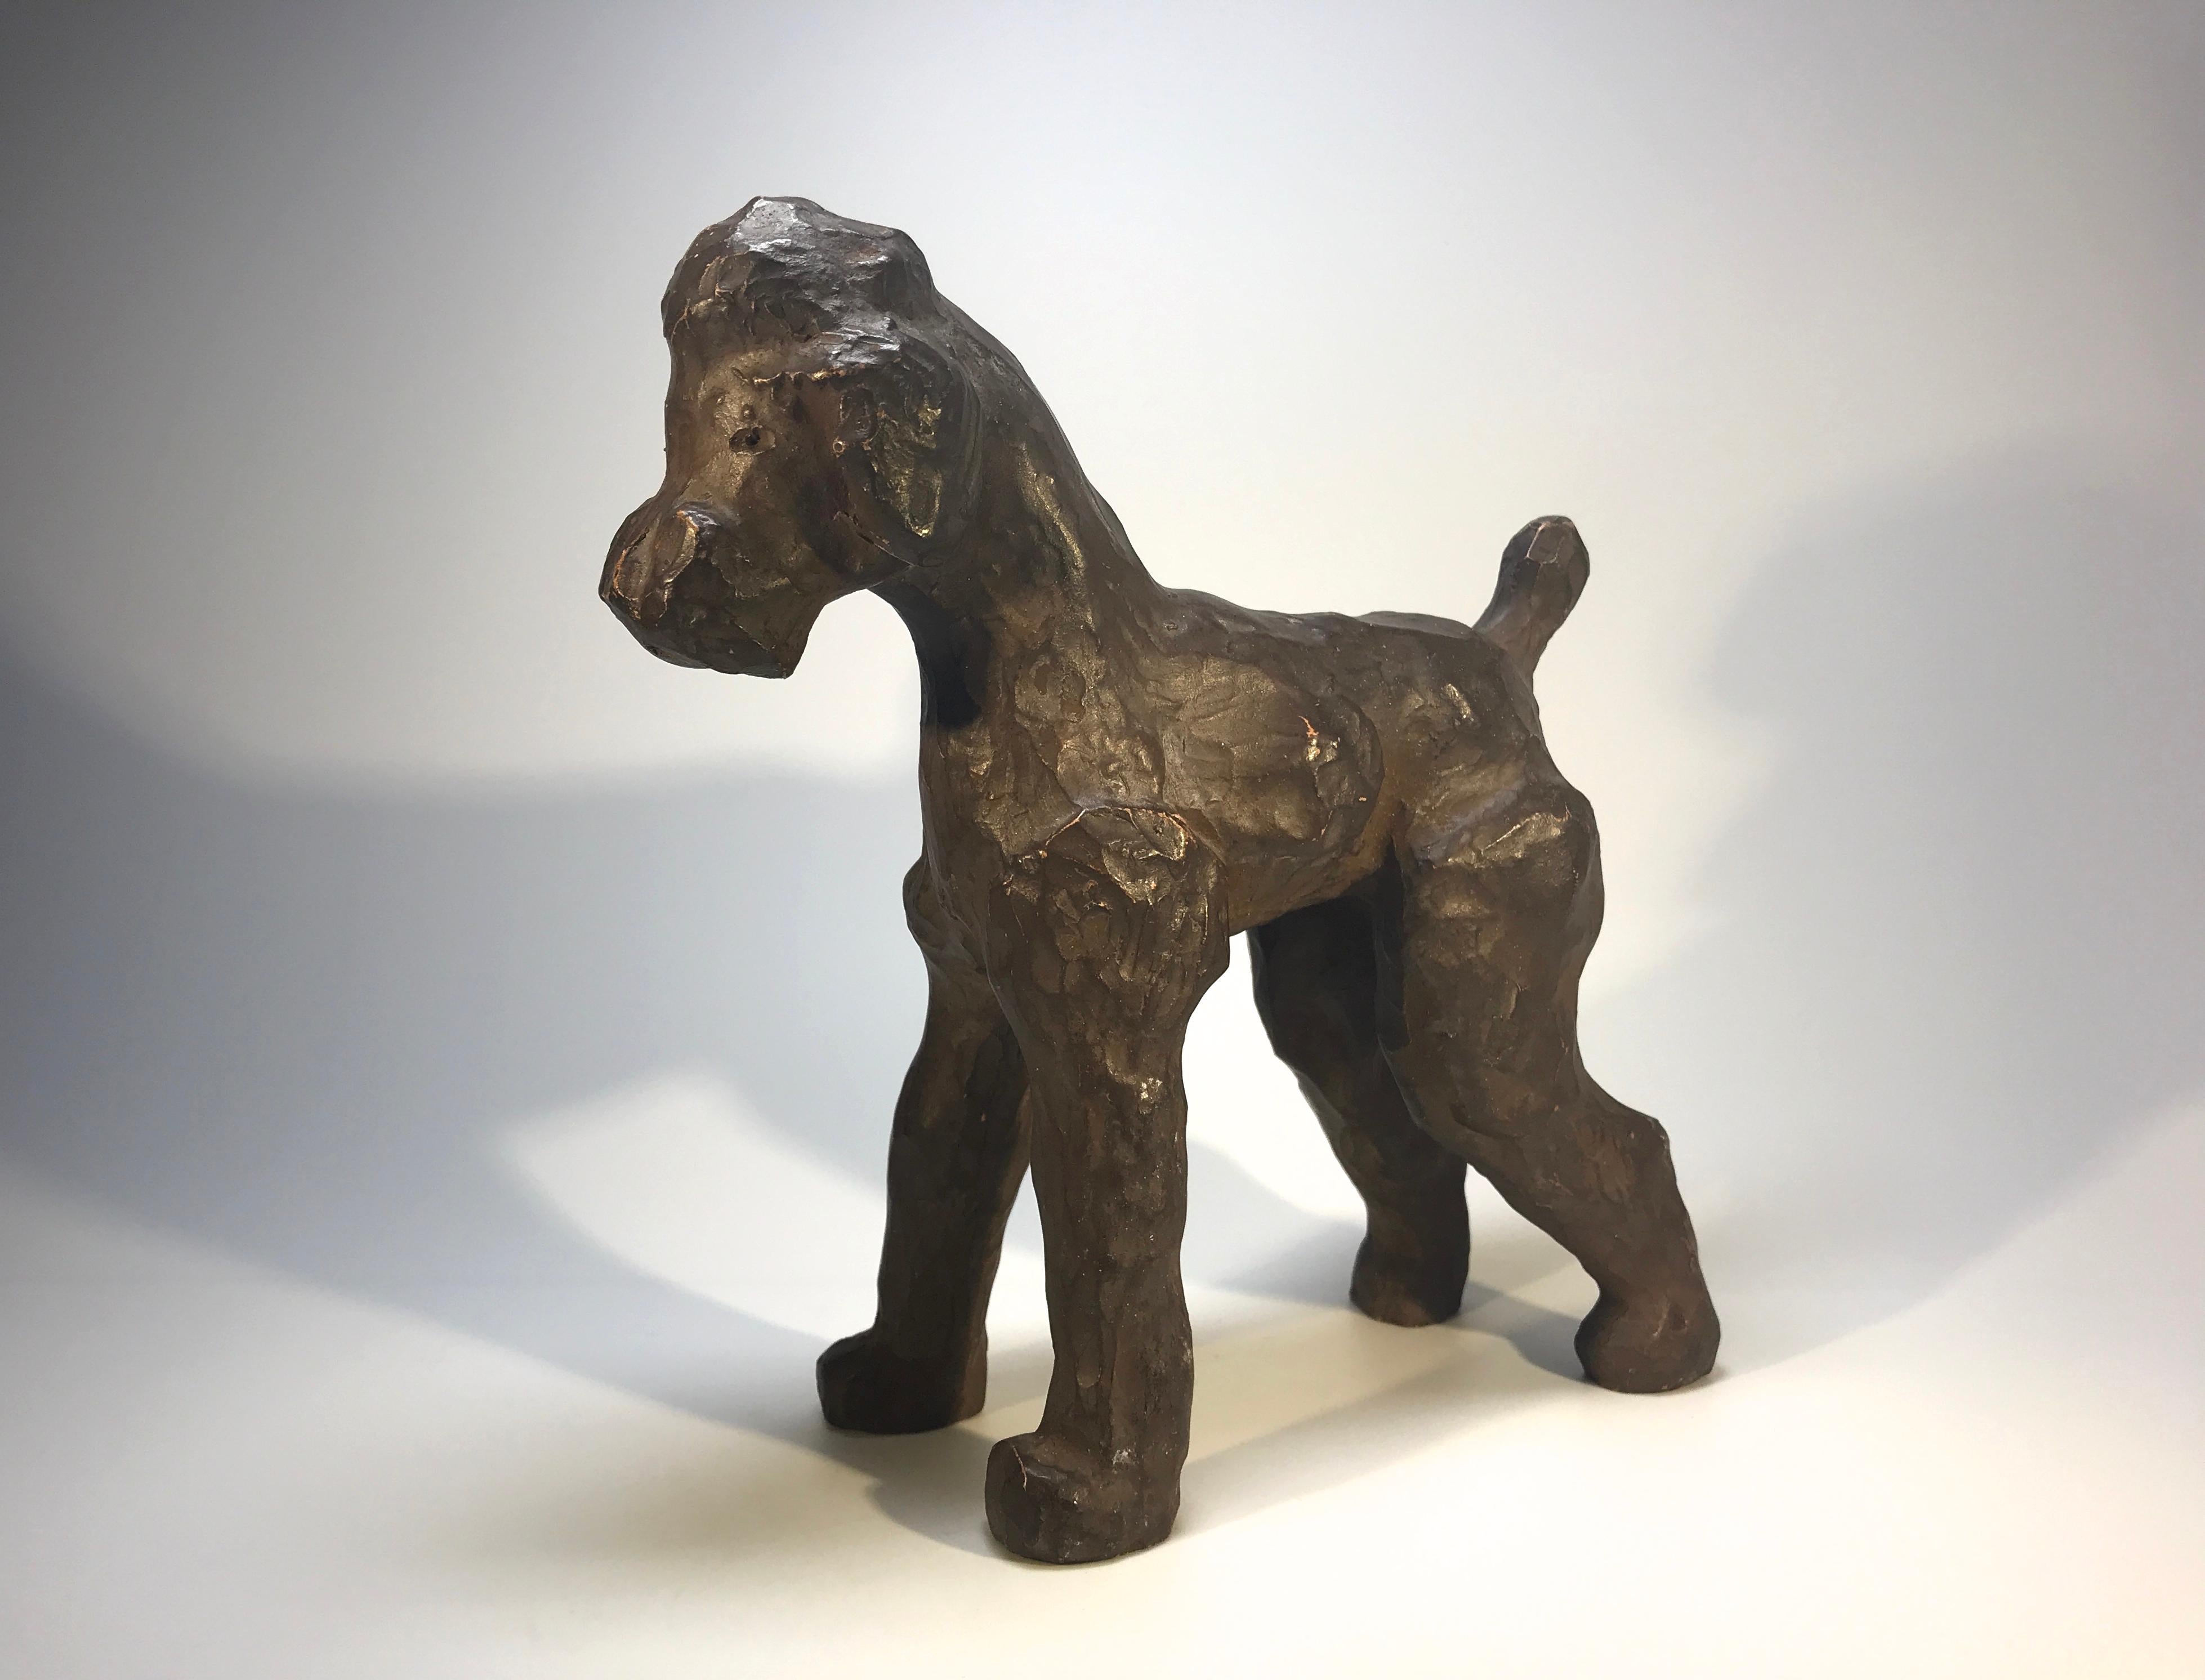 Exceptional ceramic French poodle sculpture by French ceramicist Pol Chambost, from the mid-20th century.
An charming piece with great presence and stature
Signed Pol,
circa 1950s
Measures: Height 7 inch, width 3 inch, depth 7 inch
In very good